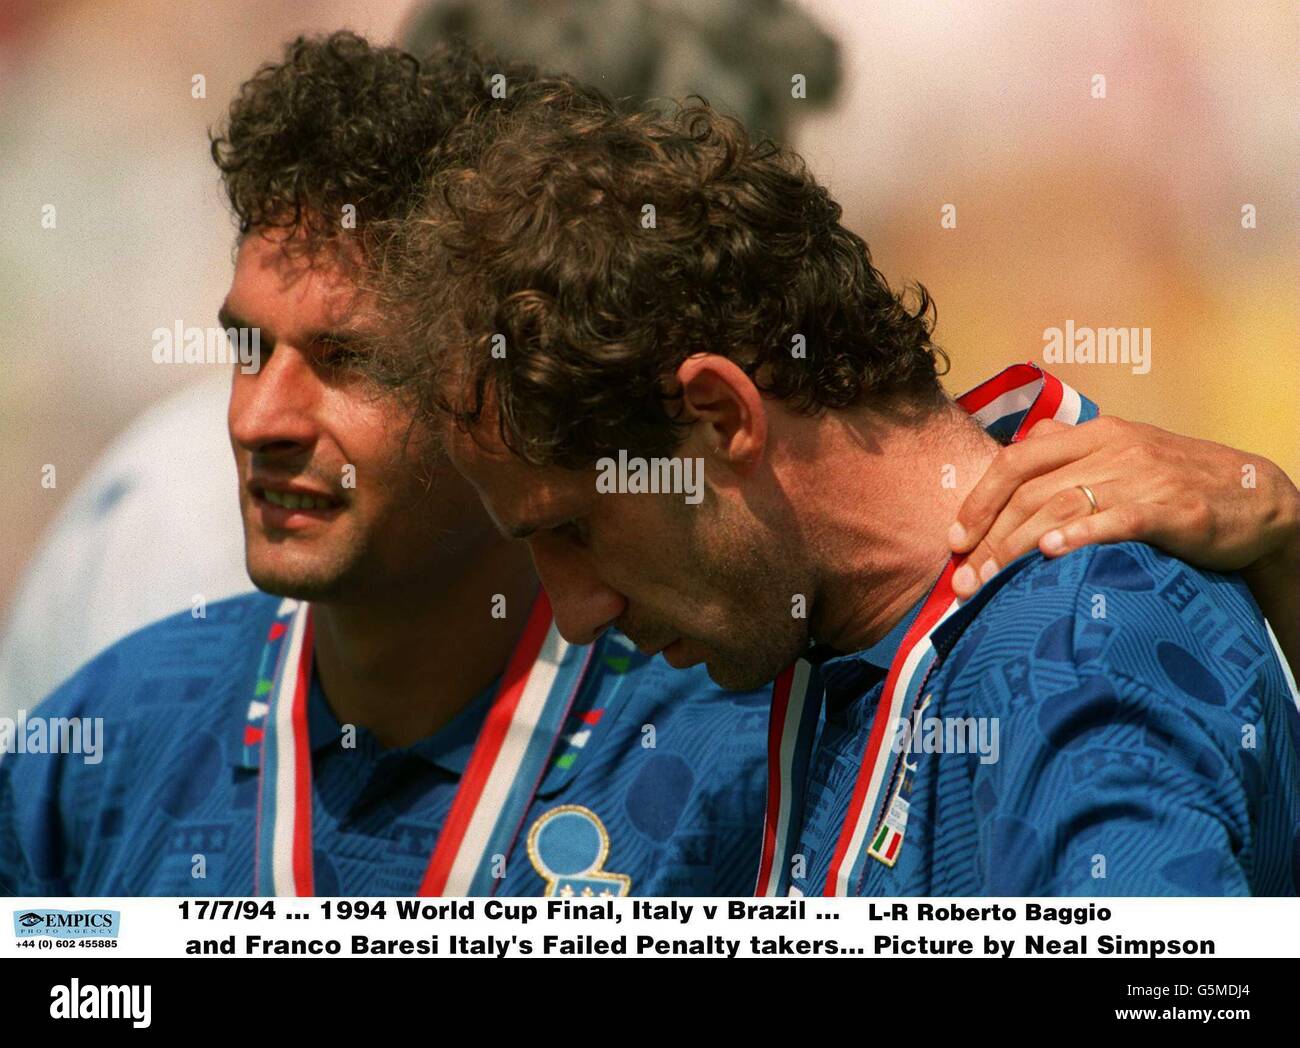 17/7/94. 1994 World Cup Final, Italy v Brazil. L-R Roberto Baggio and Franco Baresi Italy's Failed Penalty takers. Picture by Neal Simpson Stock Photo